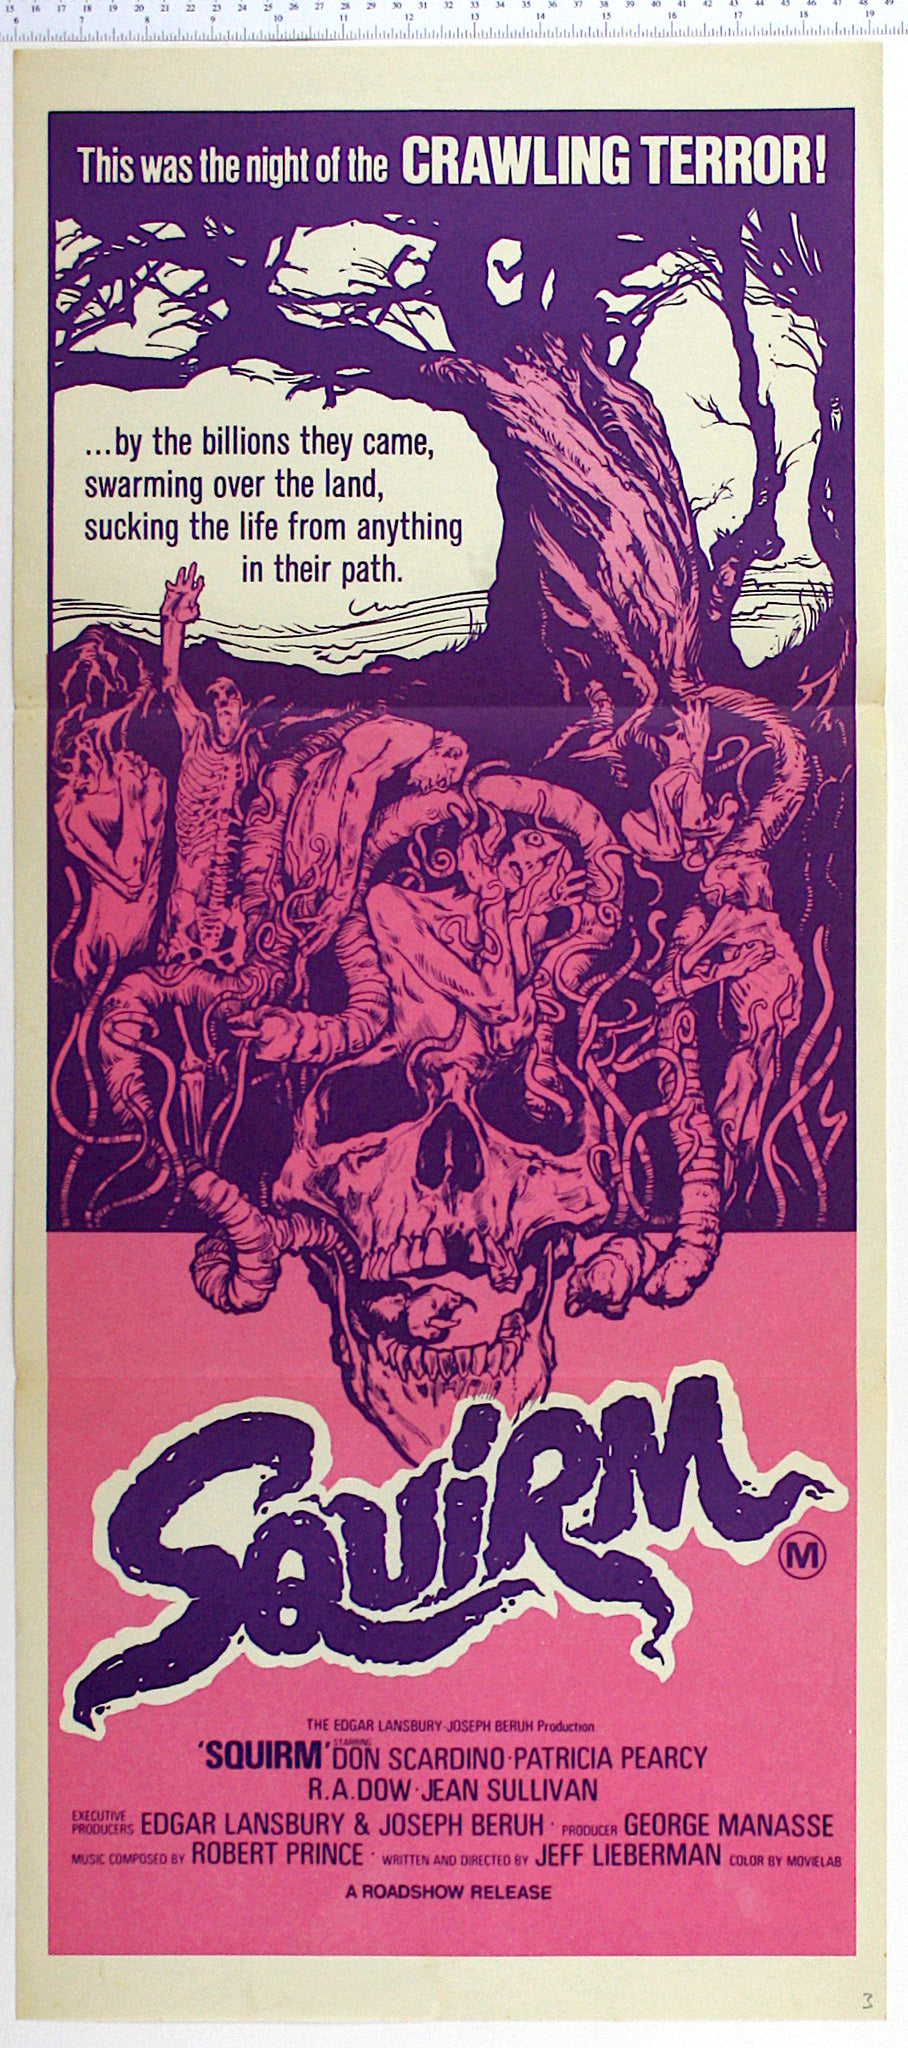 On pink and purple, artwork of skull and dying people being consumed by worms and centipedes.